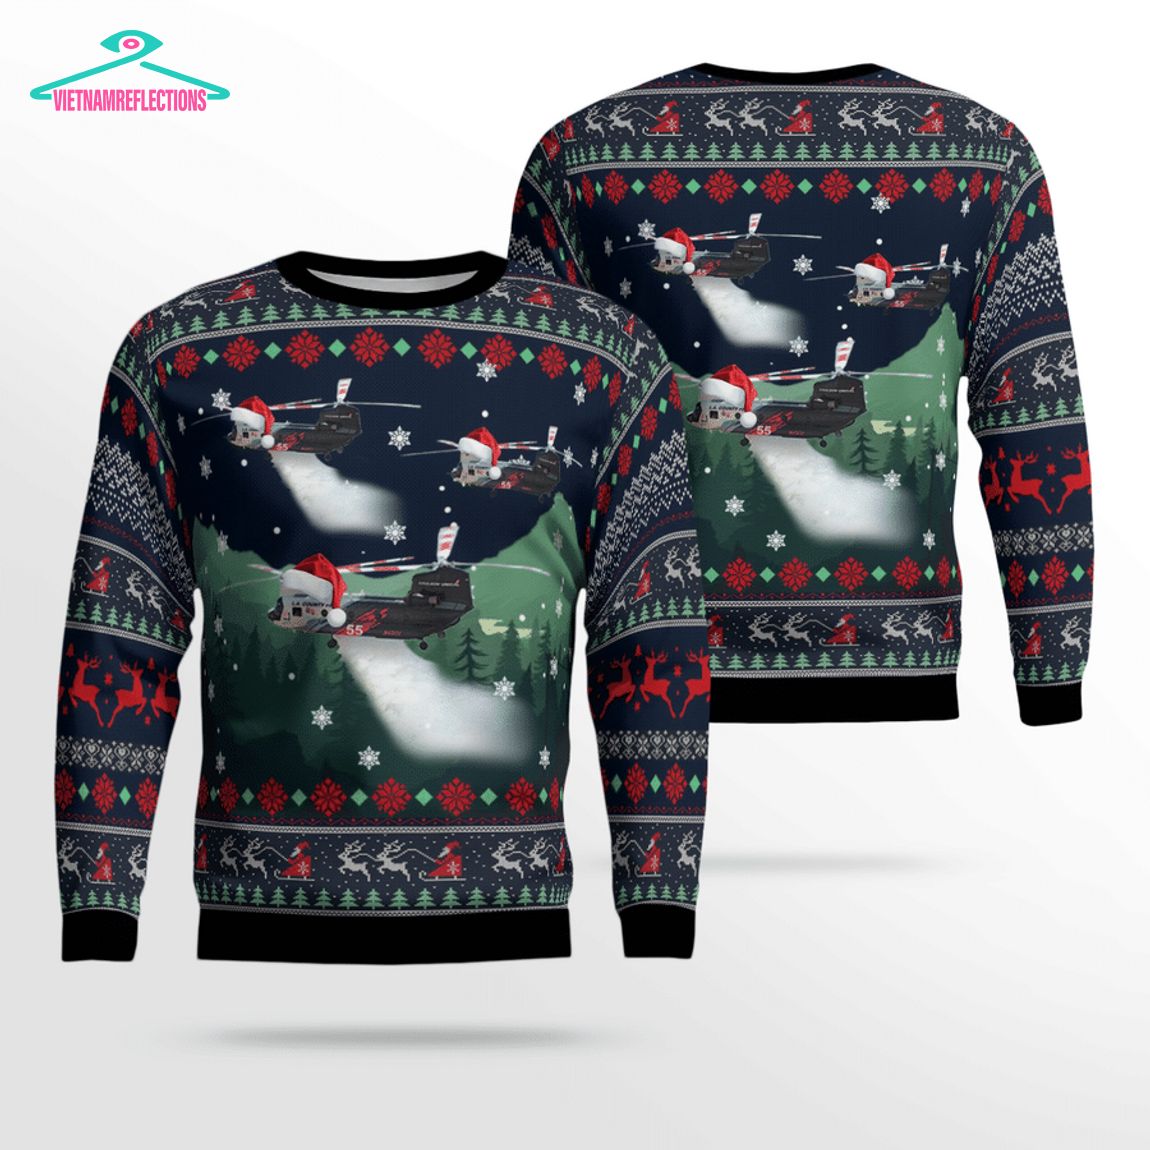 los-angeles-county-fire-department-ch-47-3d-christmas-sweater-1-llpUw.jpg